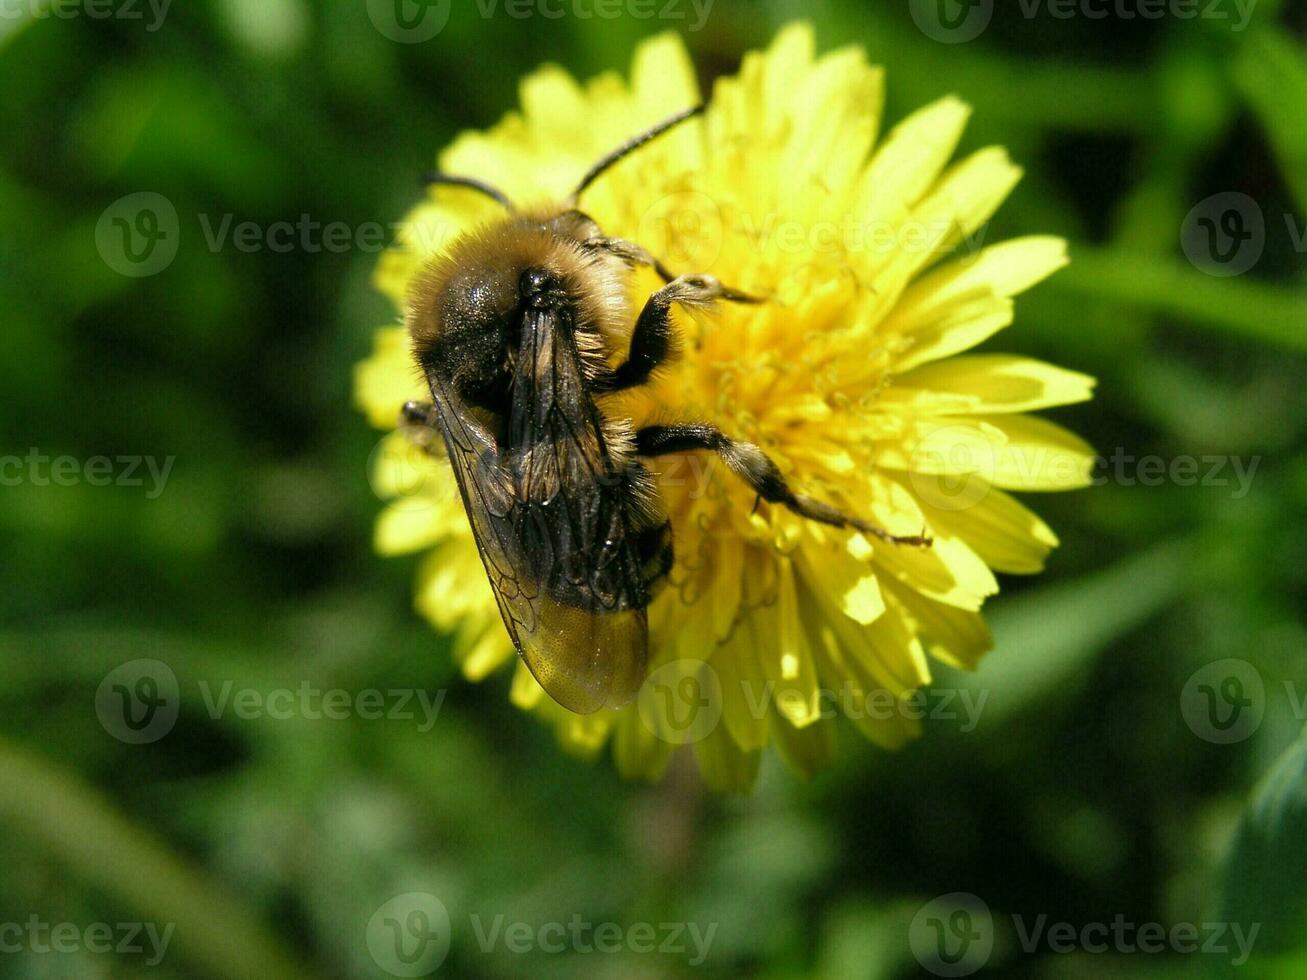 A bee collects nectar from a yellow flower dandelion in the month of May.  Honey plants Ukraine. Collect pollen from flowers and buds photo